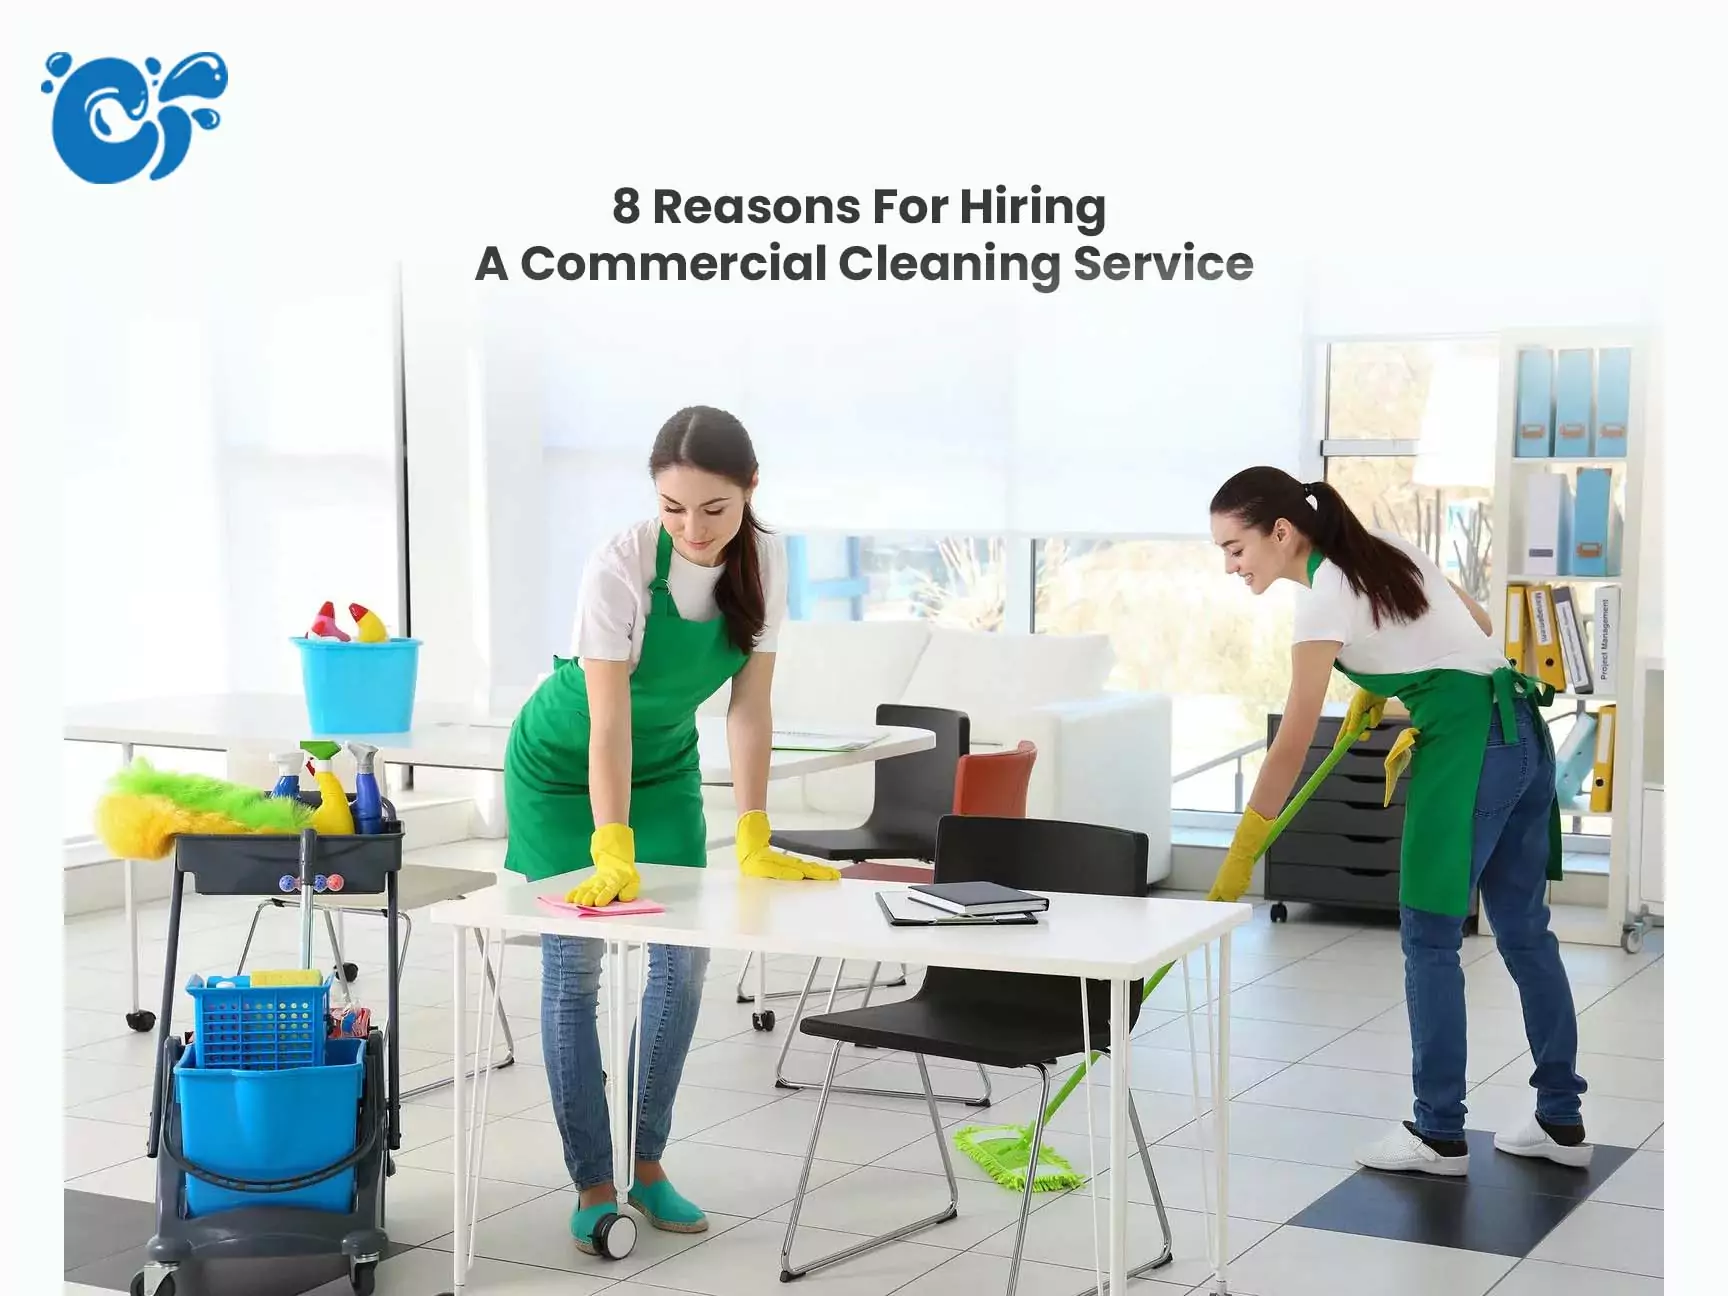 8 Reasons For Hiring A Commercial Cleaning Service